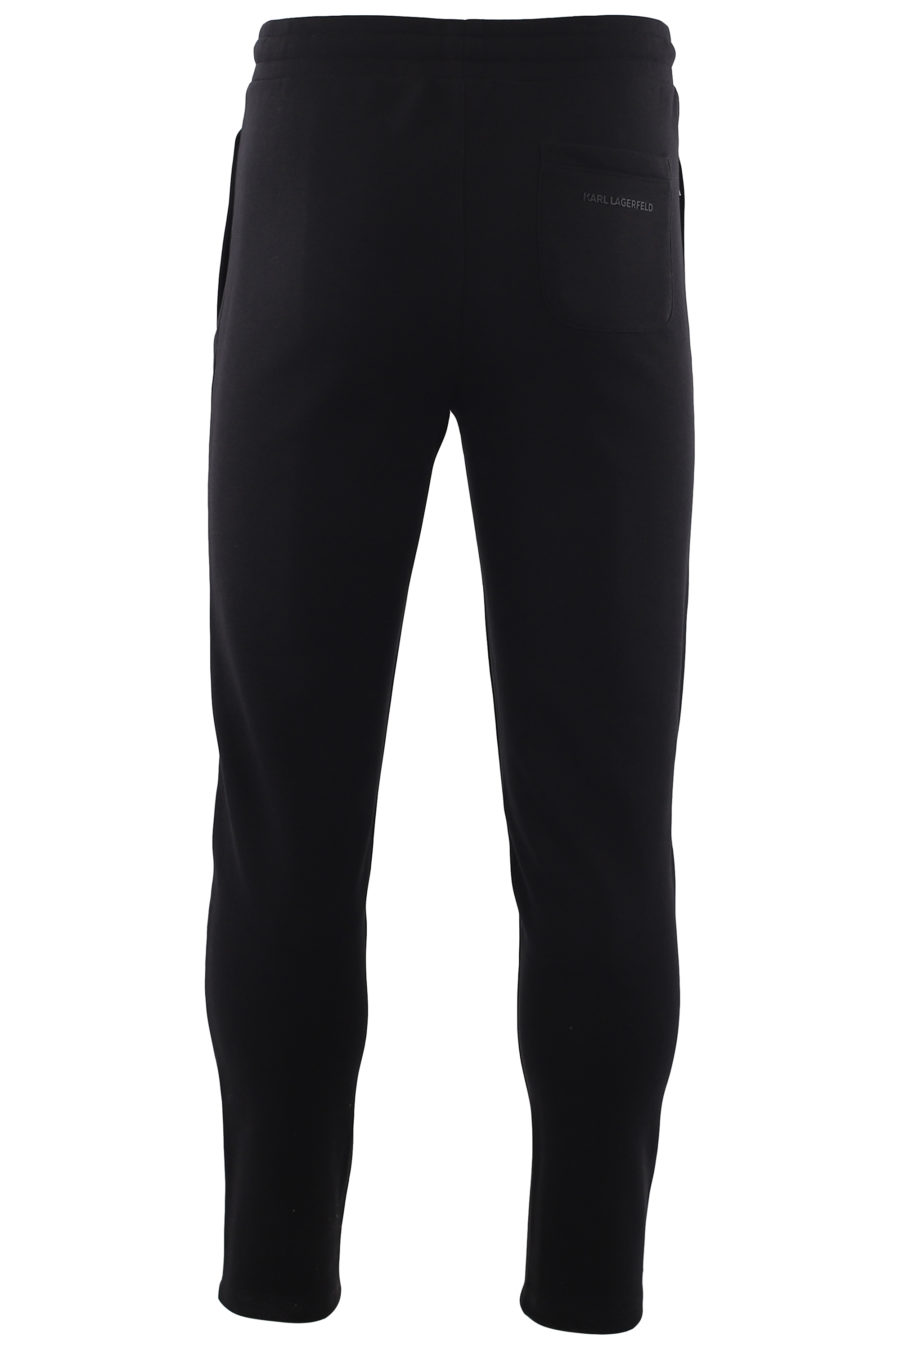 Tracksuit bottoms black with silver logo - IMG 6653